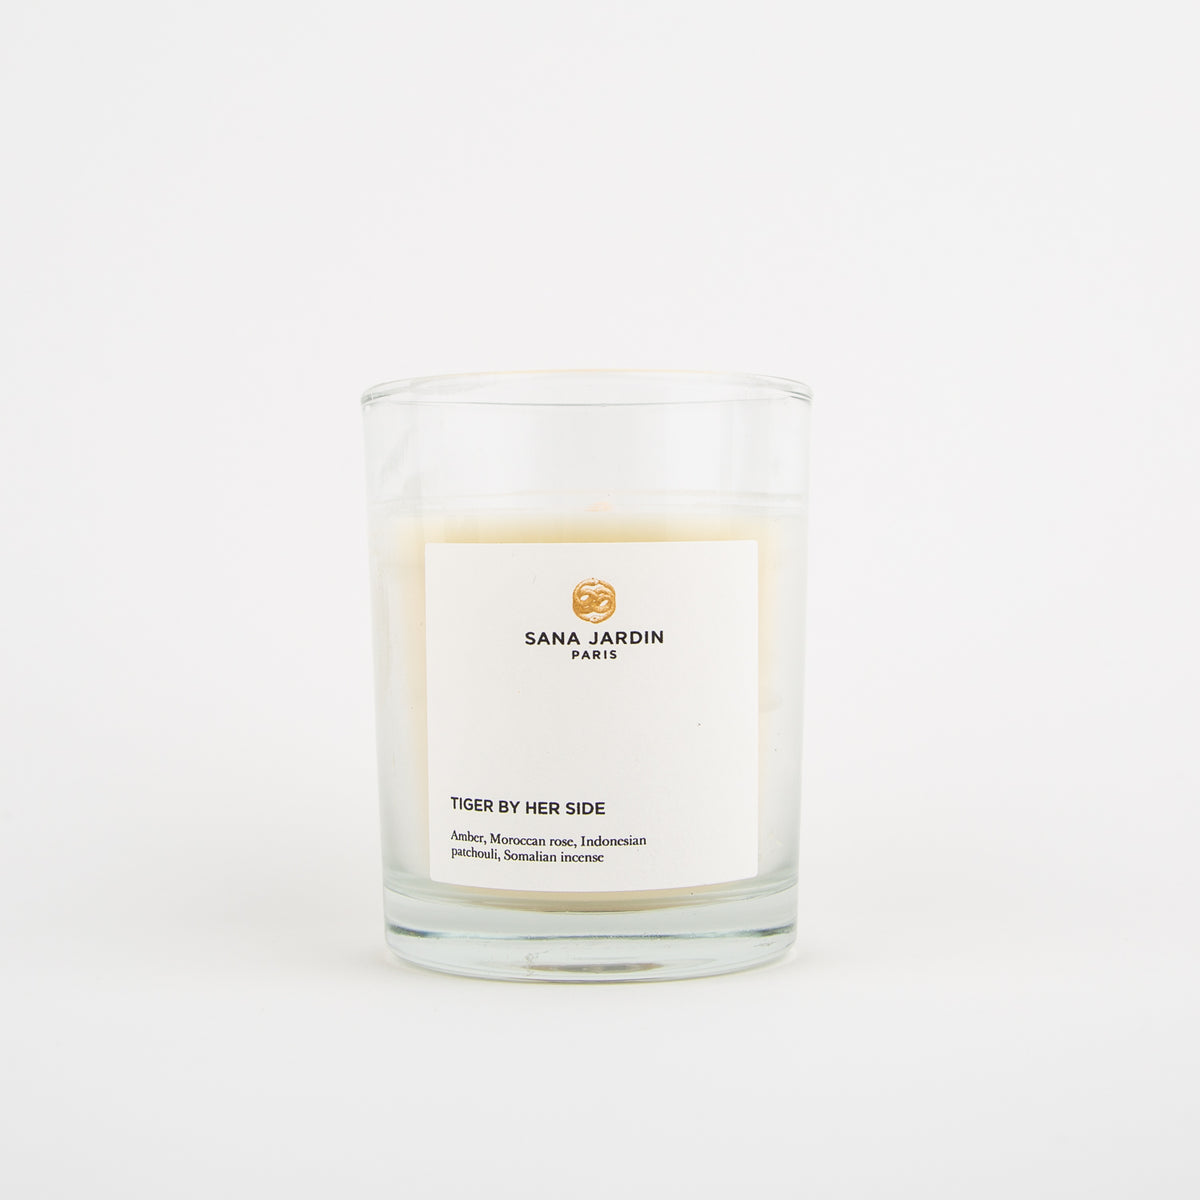 tiger by her side scented candle by Sana Jardin at Secret Location